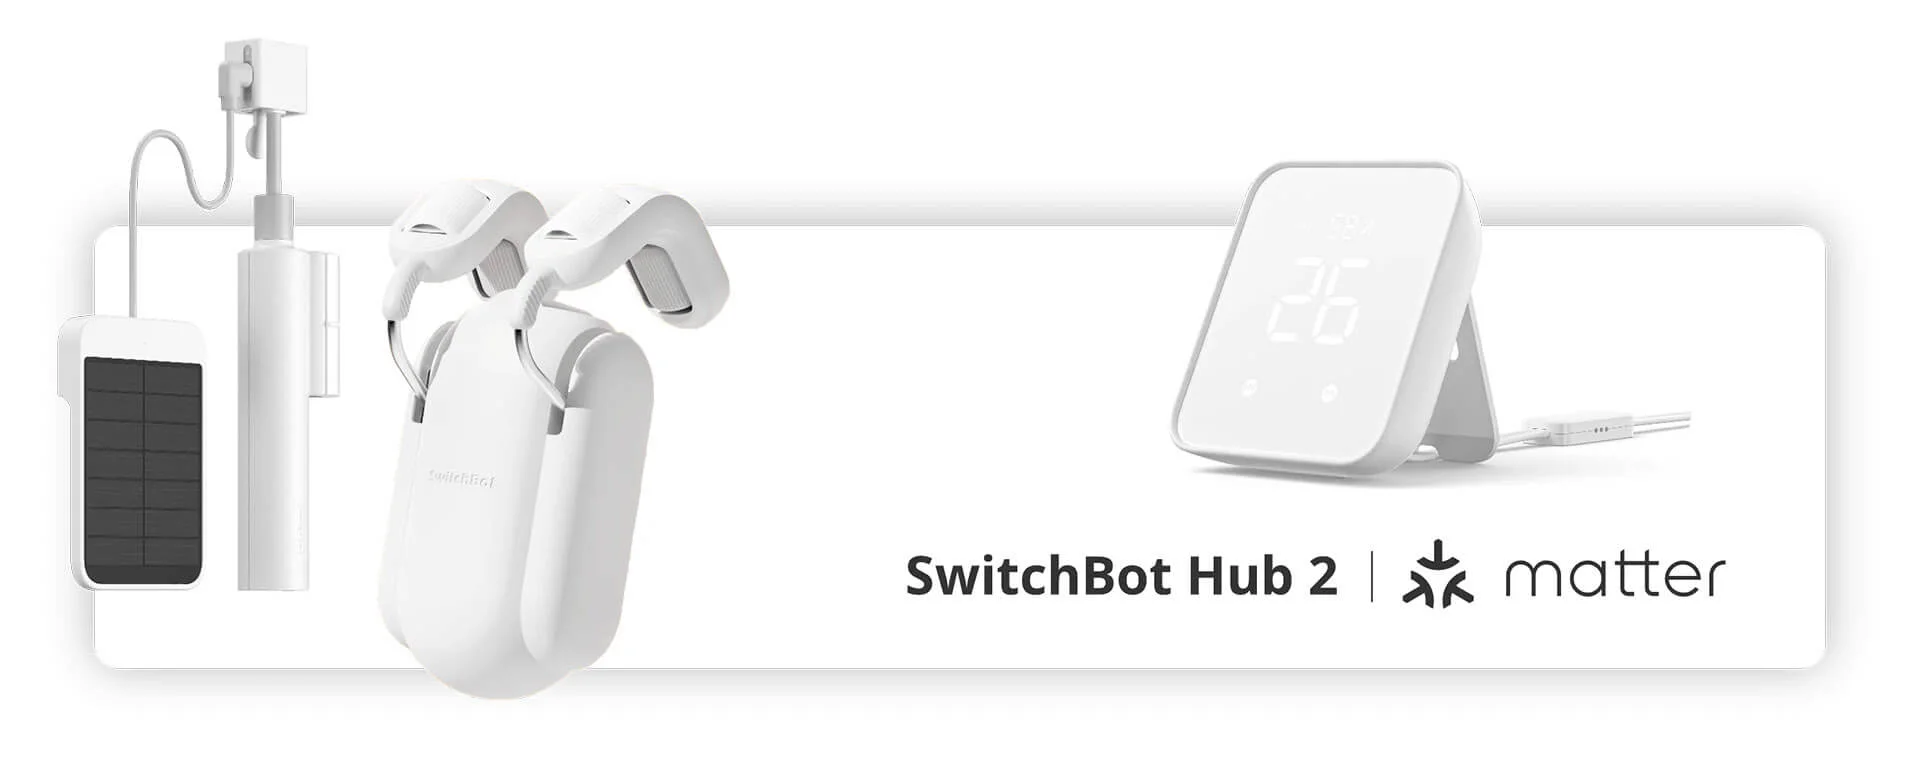 SwitchBot Review and Home Assistant Integration - SmartHomeScene